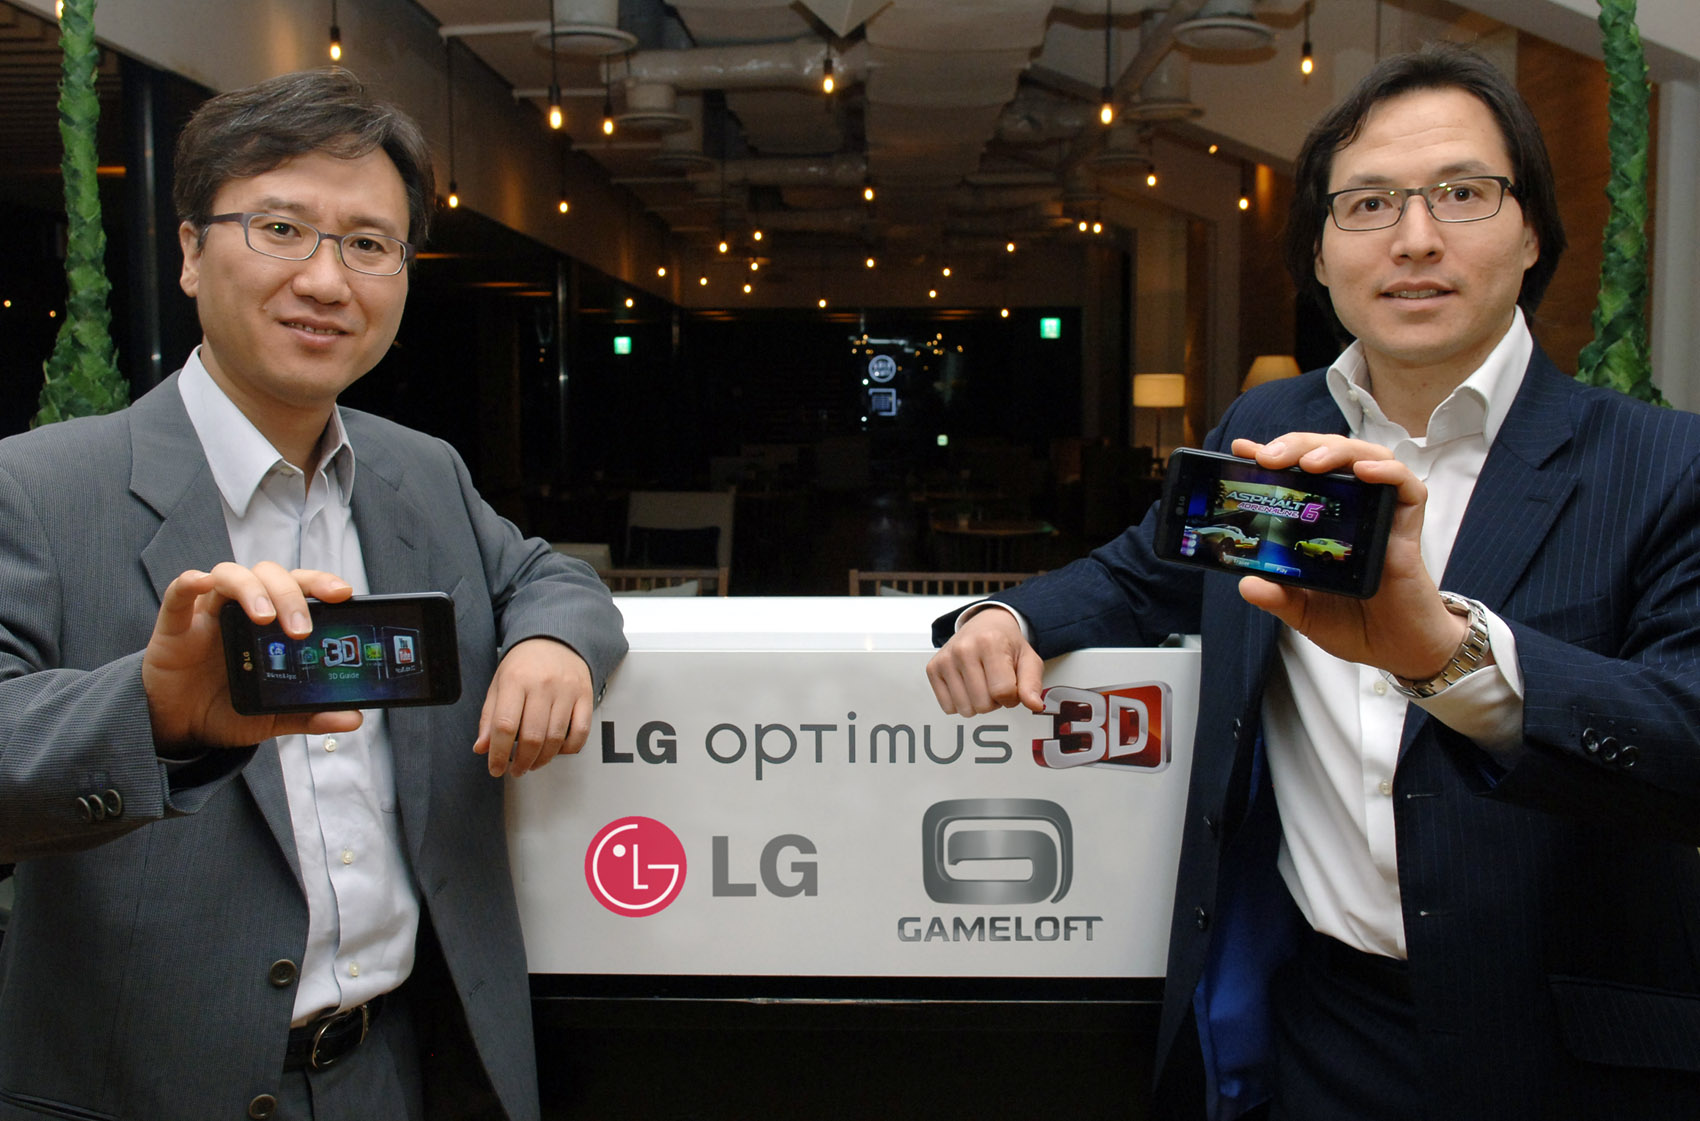 LG JOINS EXPANDING PORTABLE GAMING MARKET WITH OPTIMUS 3D AND HIGH QU